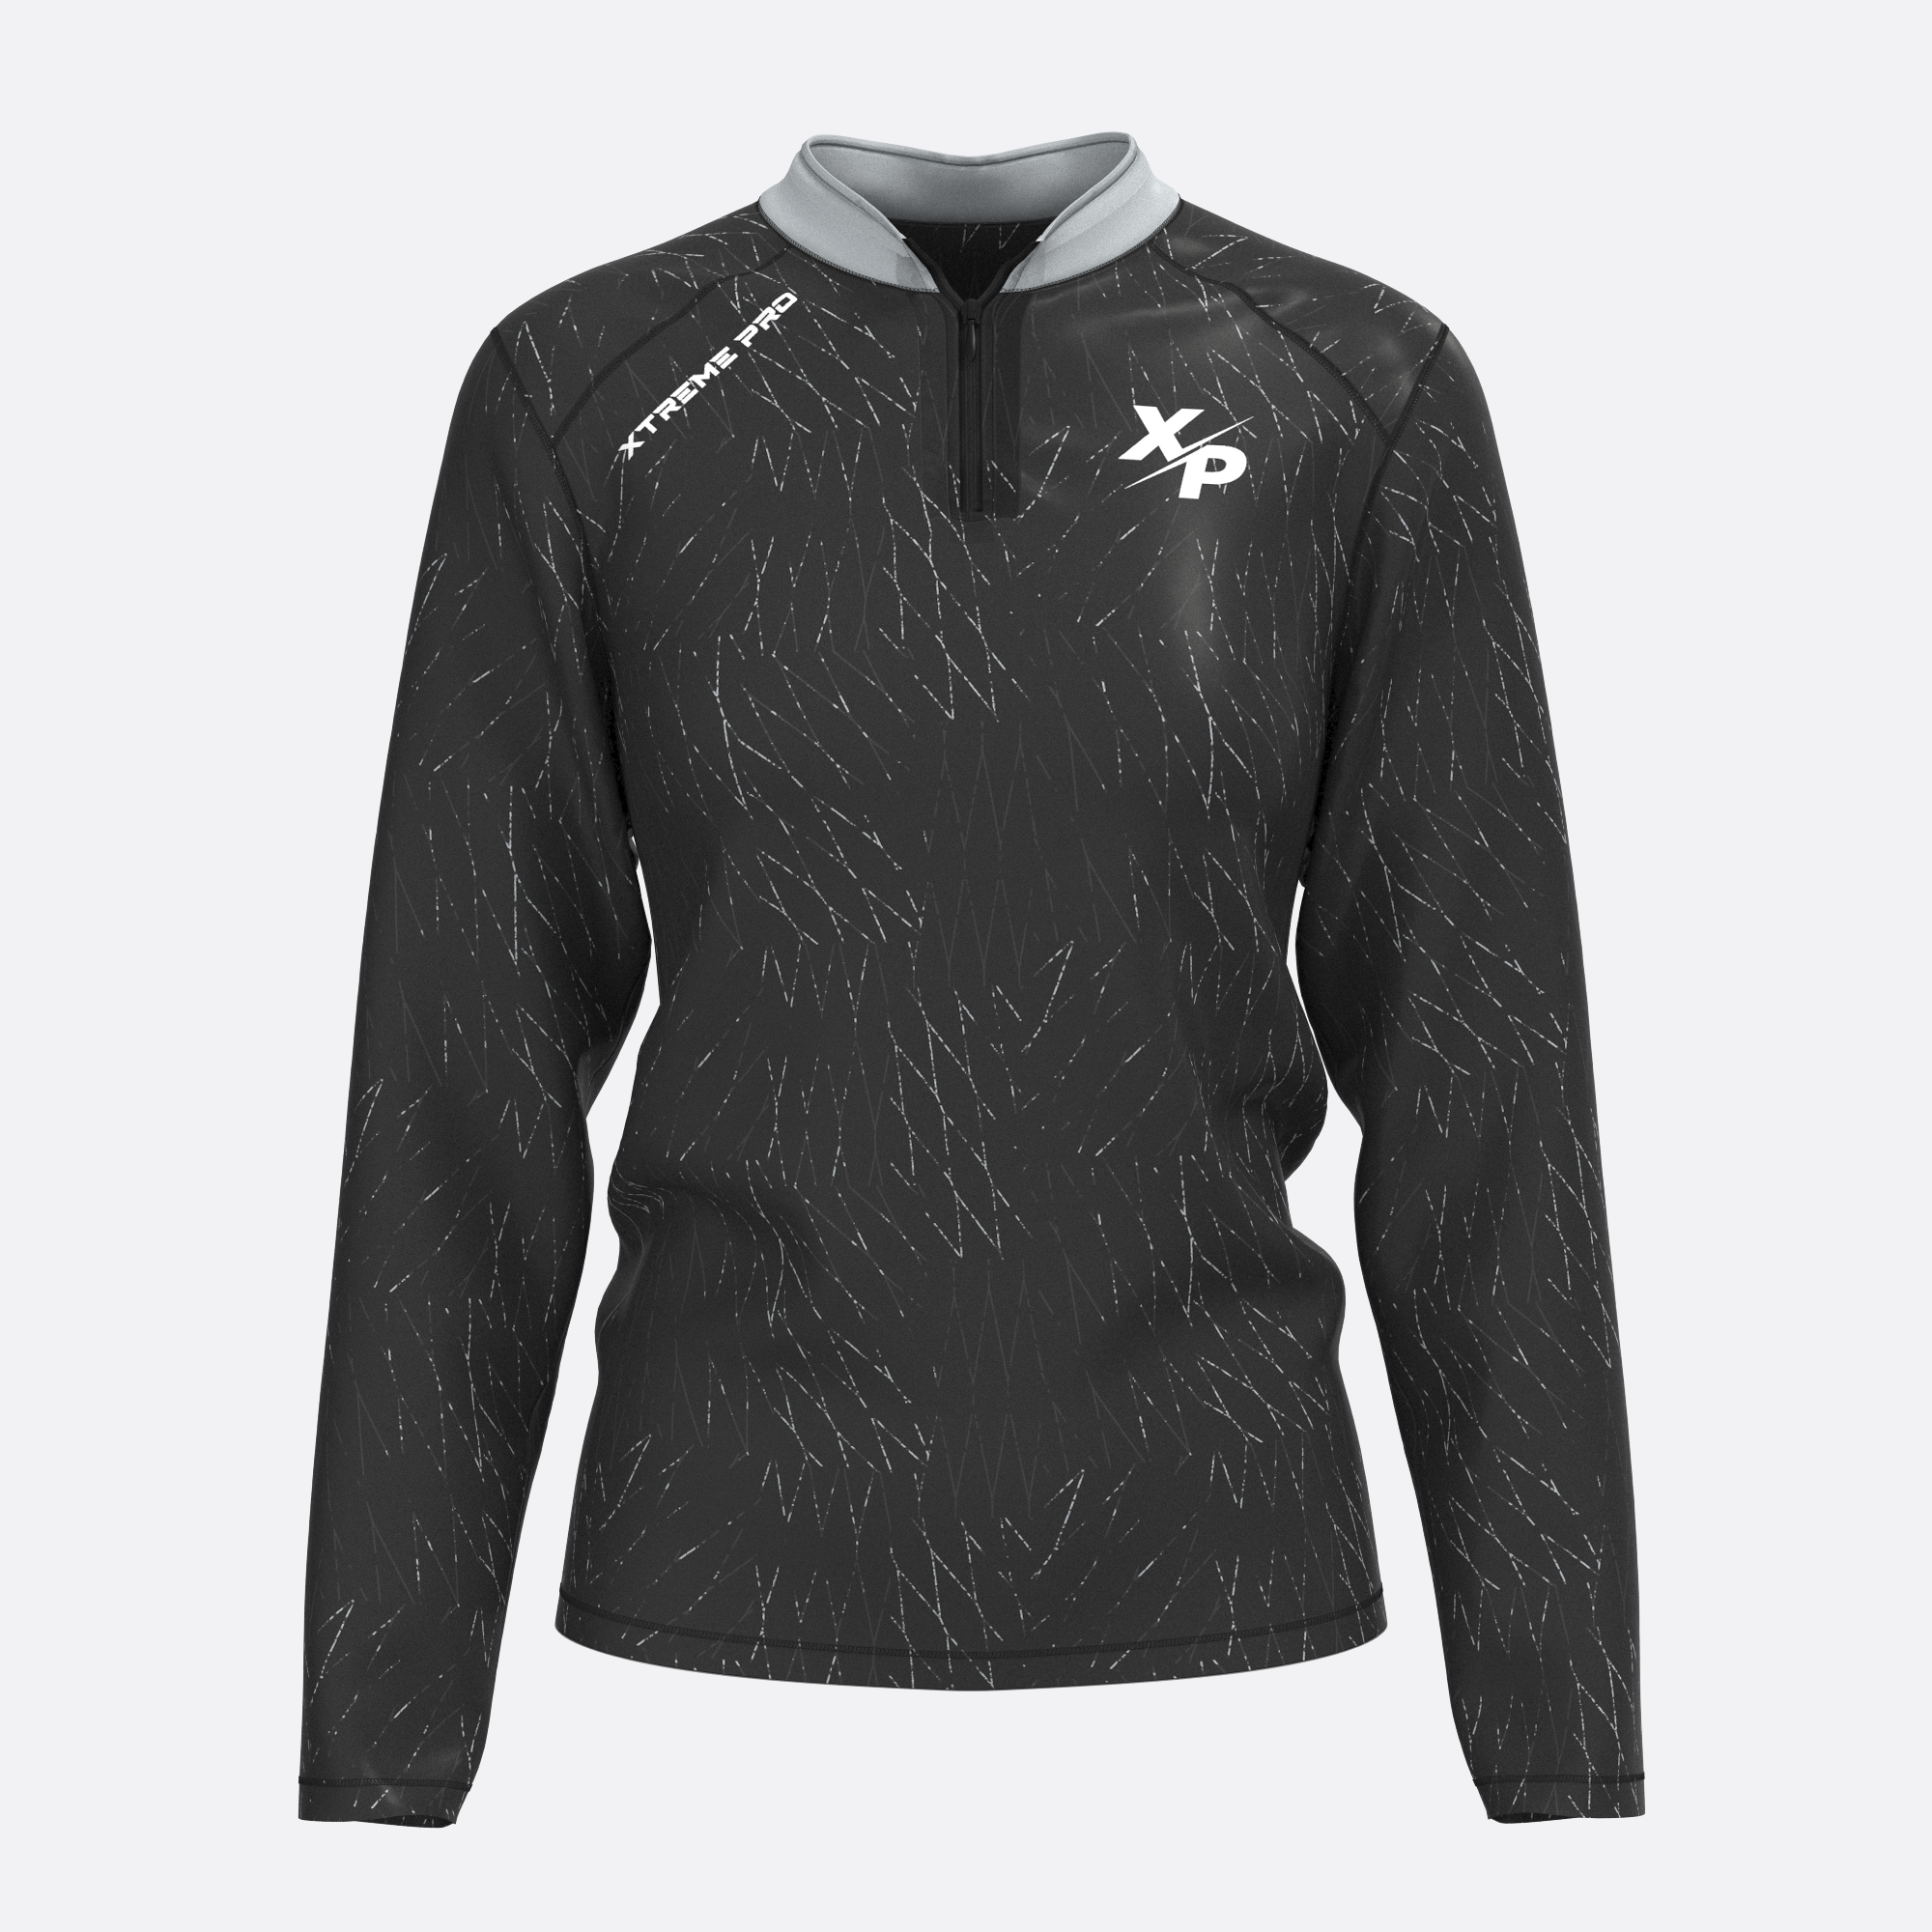 Caged Quarter Zip Jacket in Silver Xtreme Pro Apparel